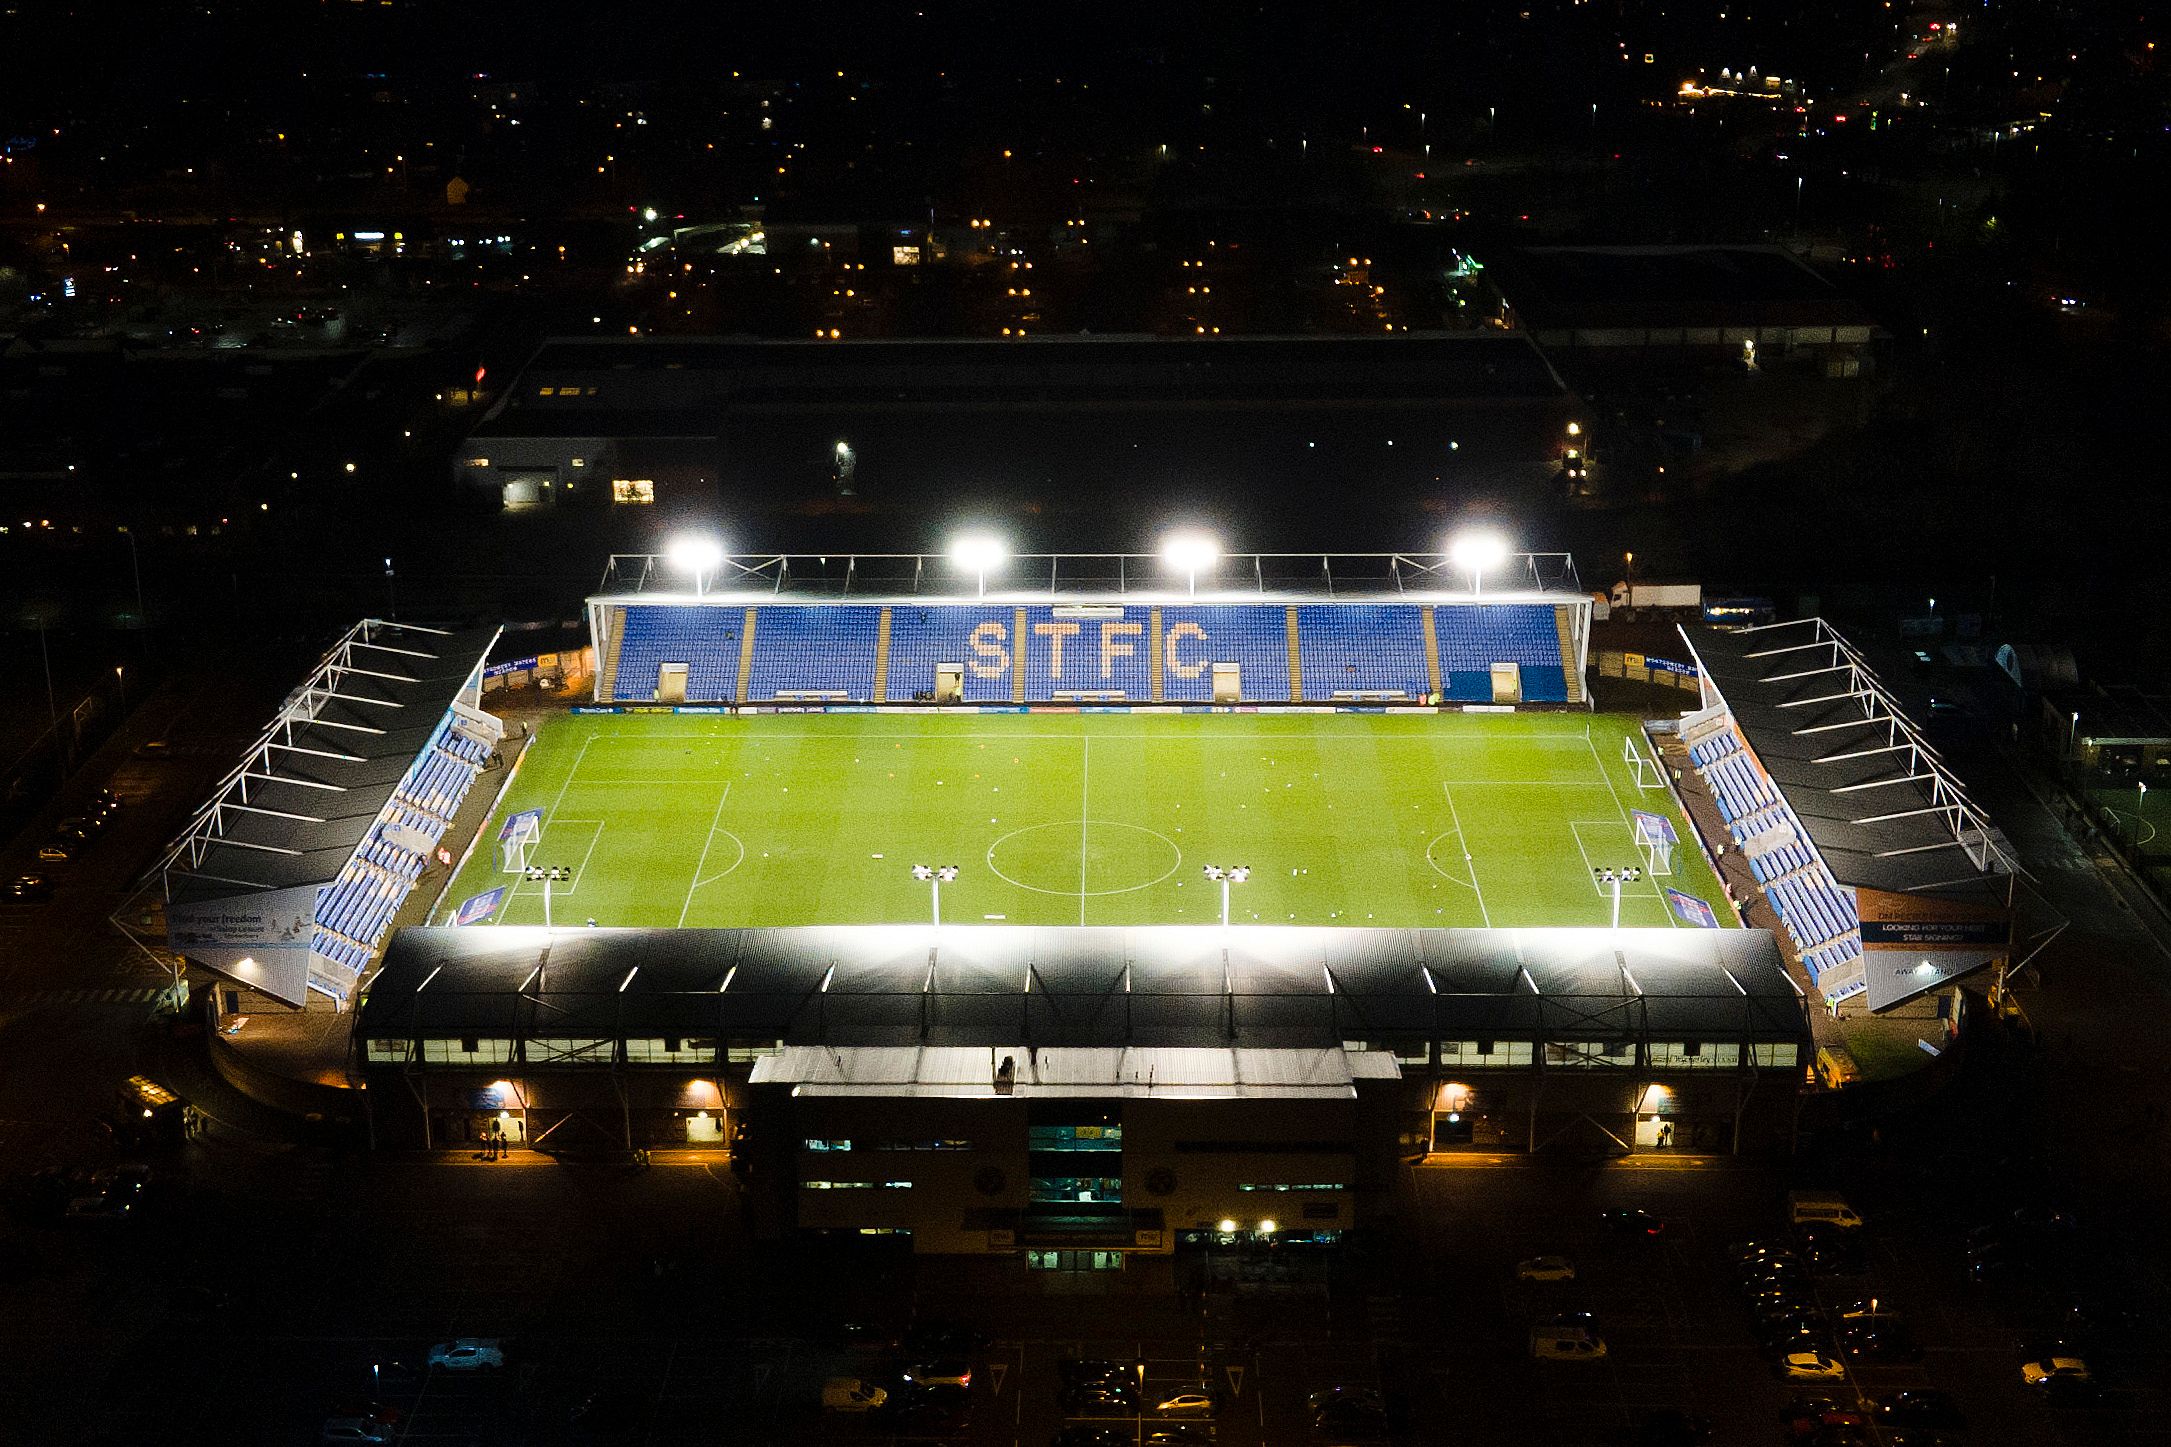 Montgomery Waters Meadow, home of Shrewsbury Town FC